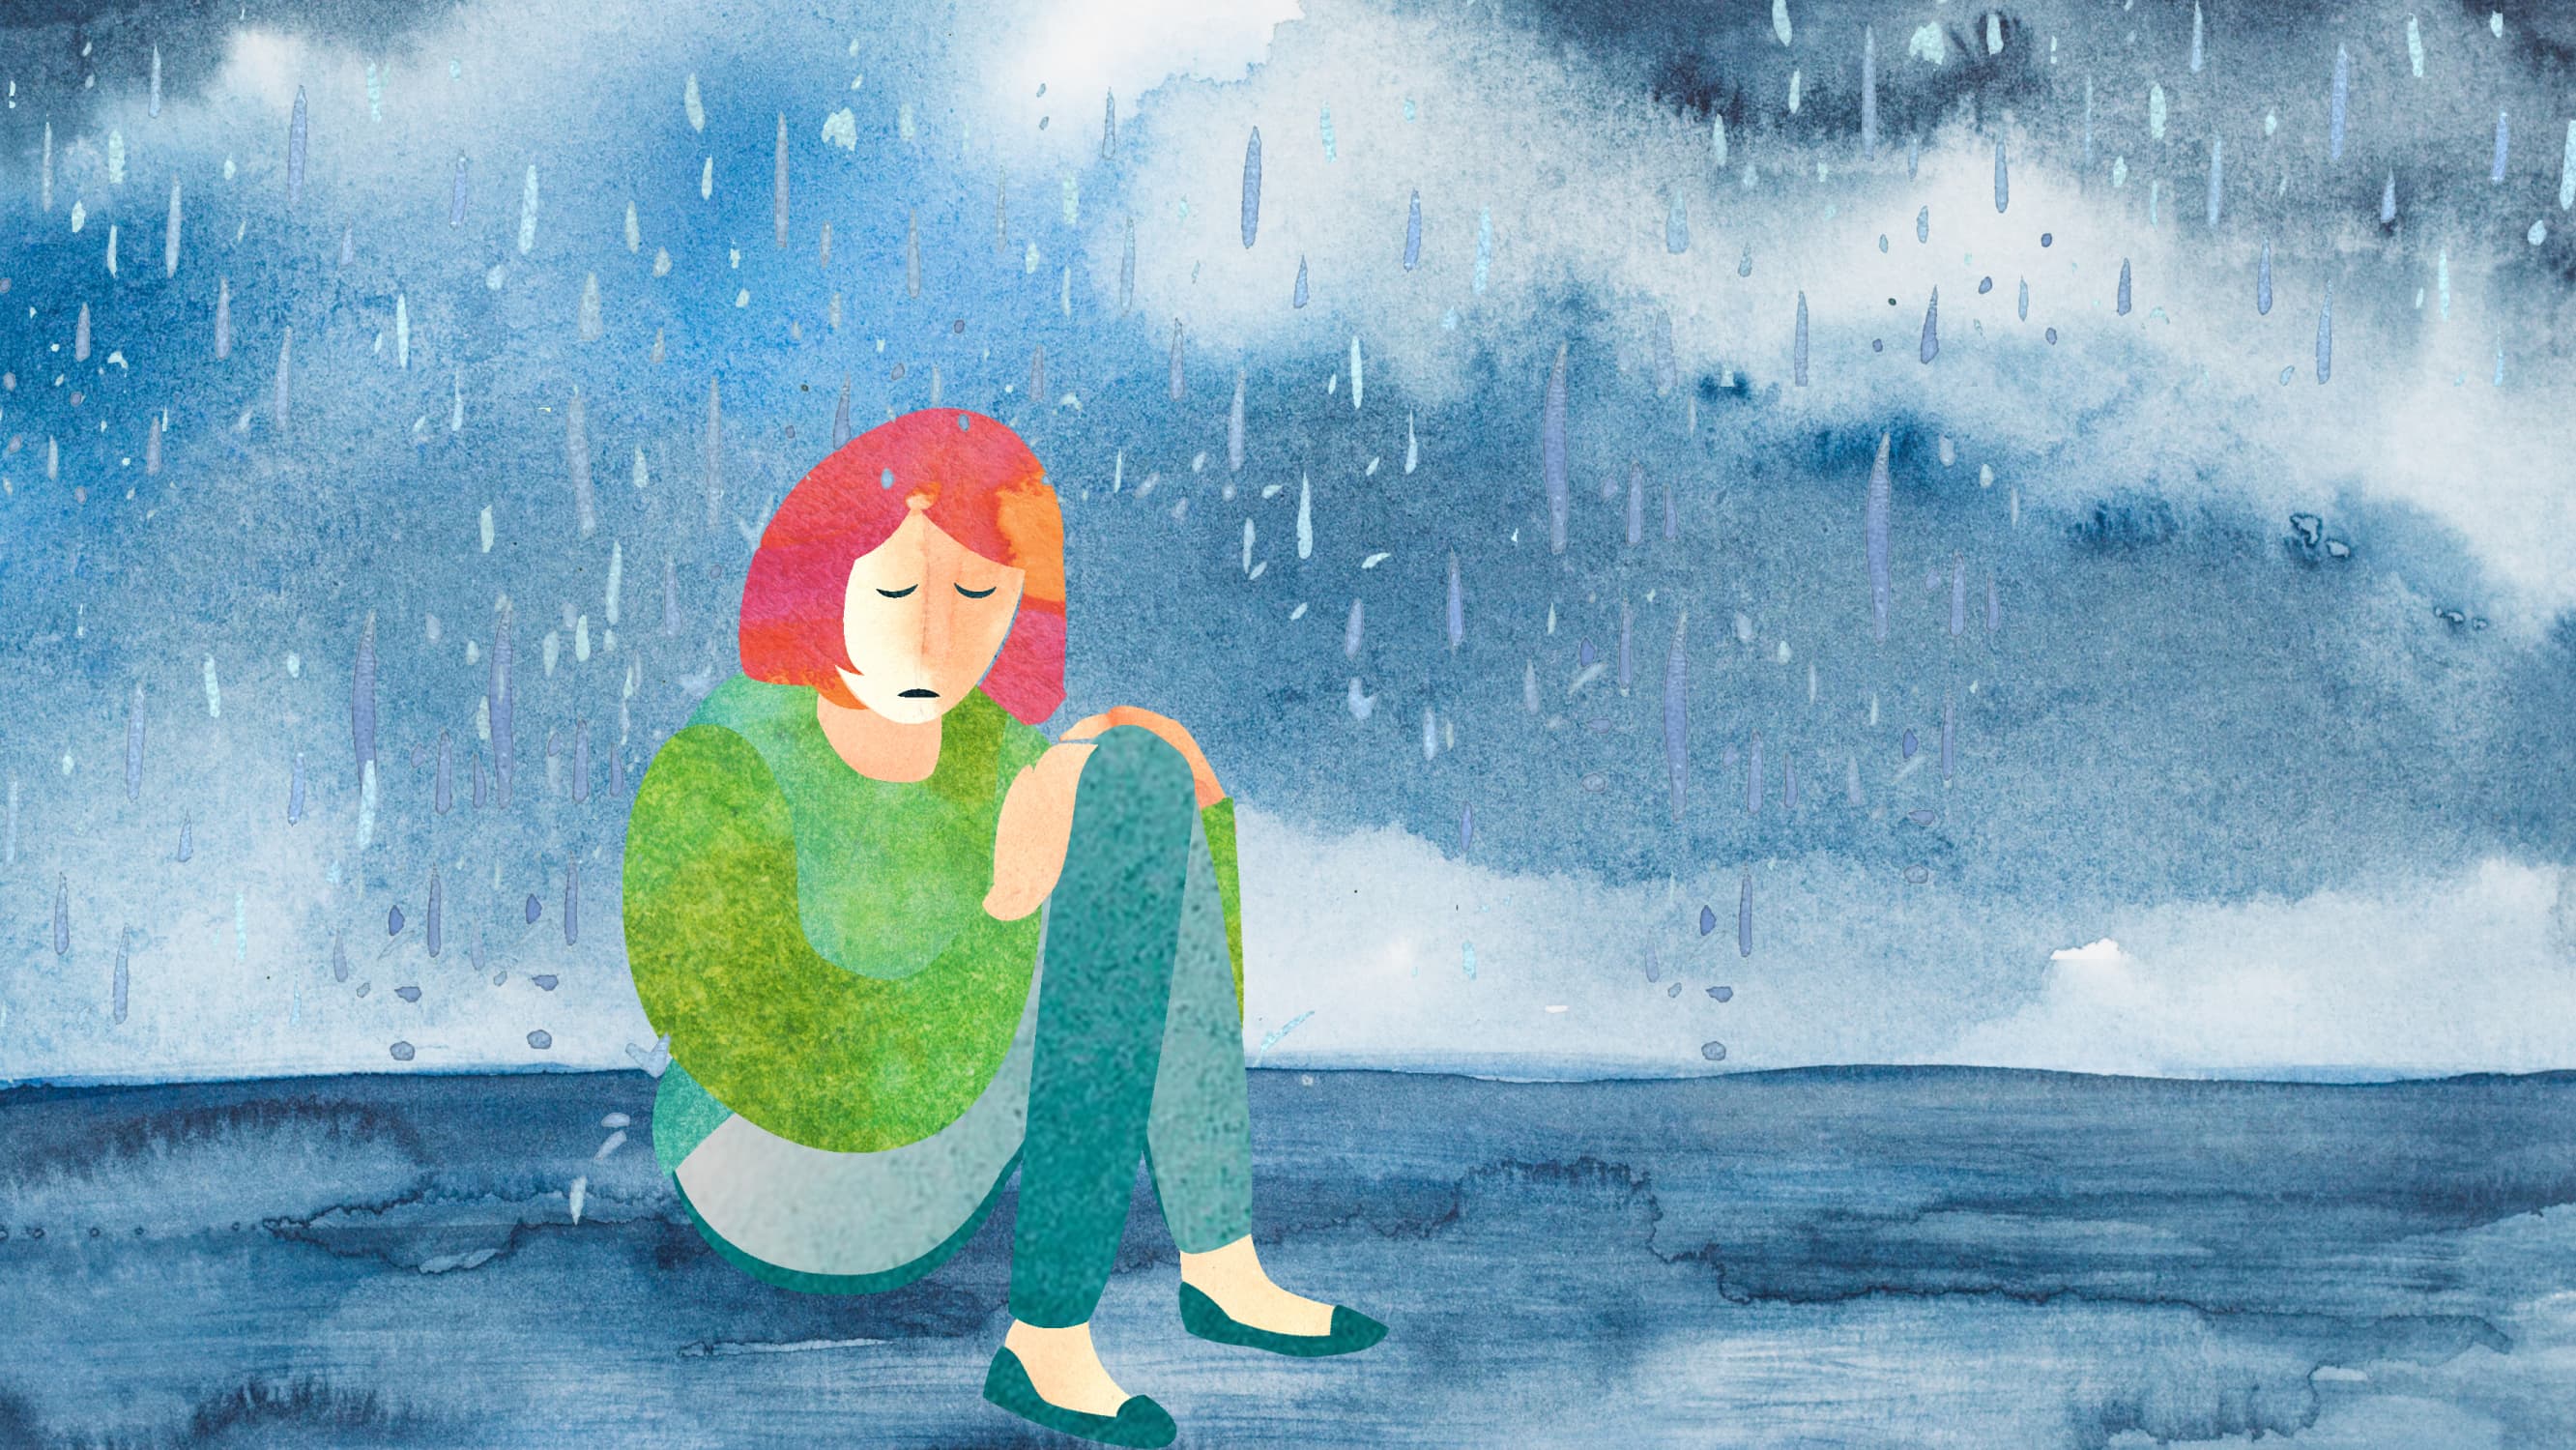 An illustration of a woman suffering from depression who might be helped by esketamine